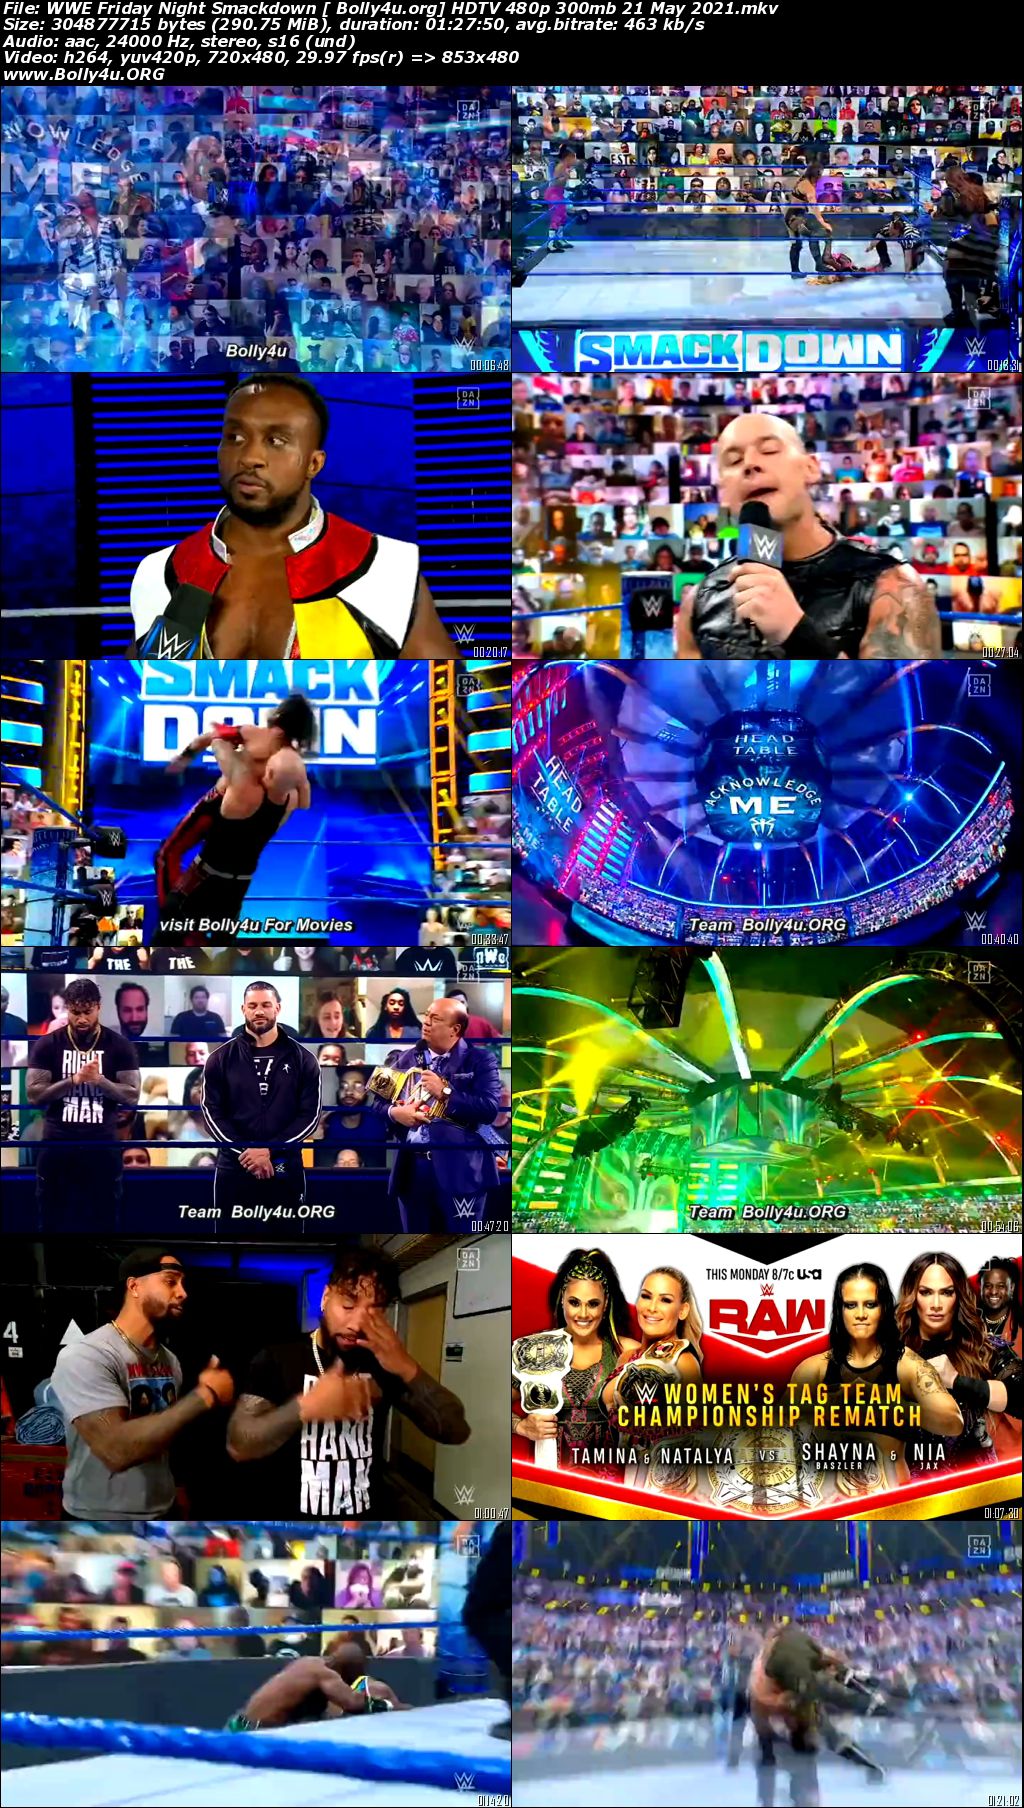 WWE Friday Night Smackdown HDTV 480p 300mb 21 May 2021 Download